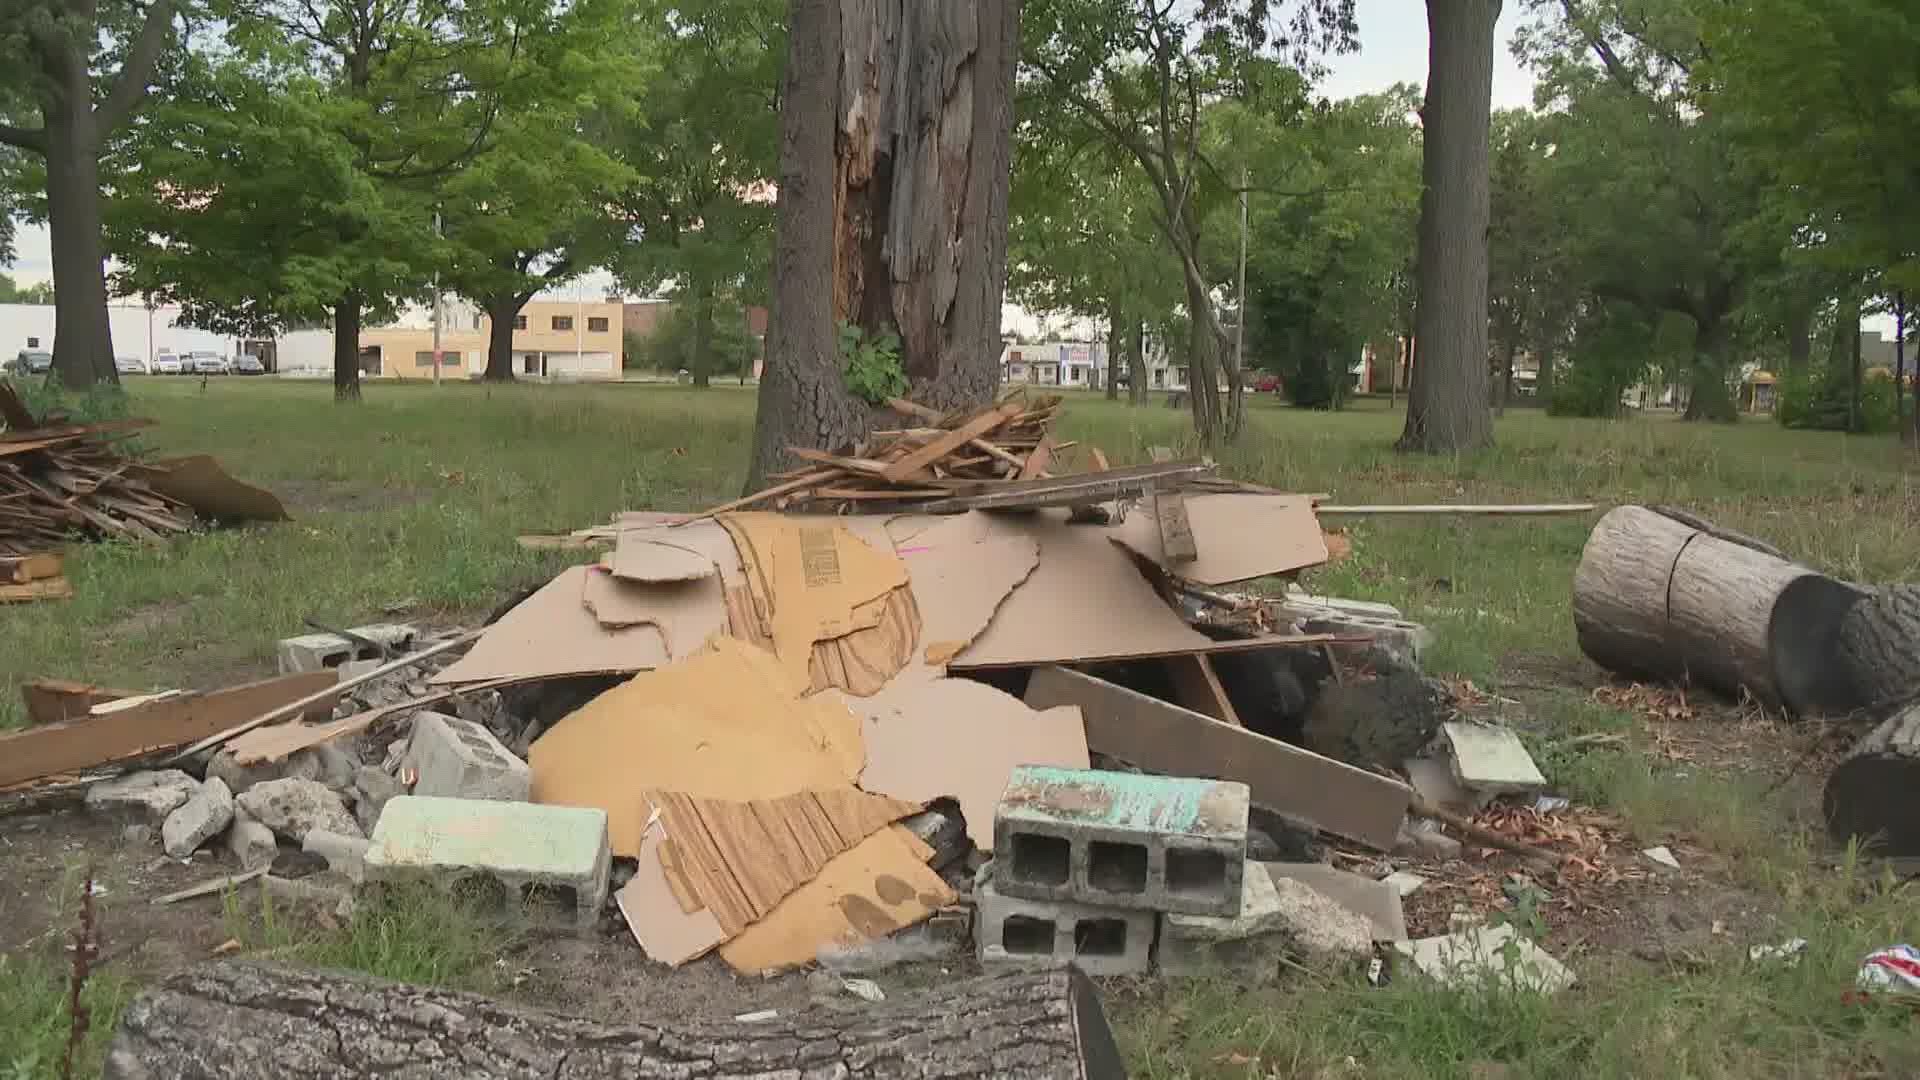 Muskegon Heights Police hope $500 reward puts an end to illegal dumping in the city.